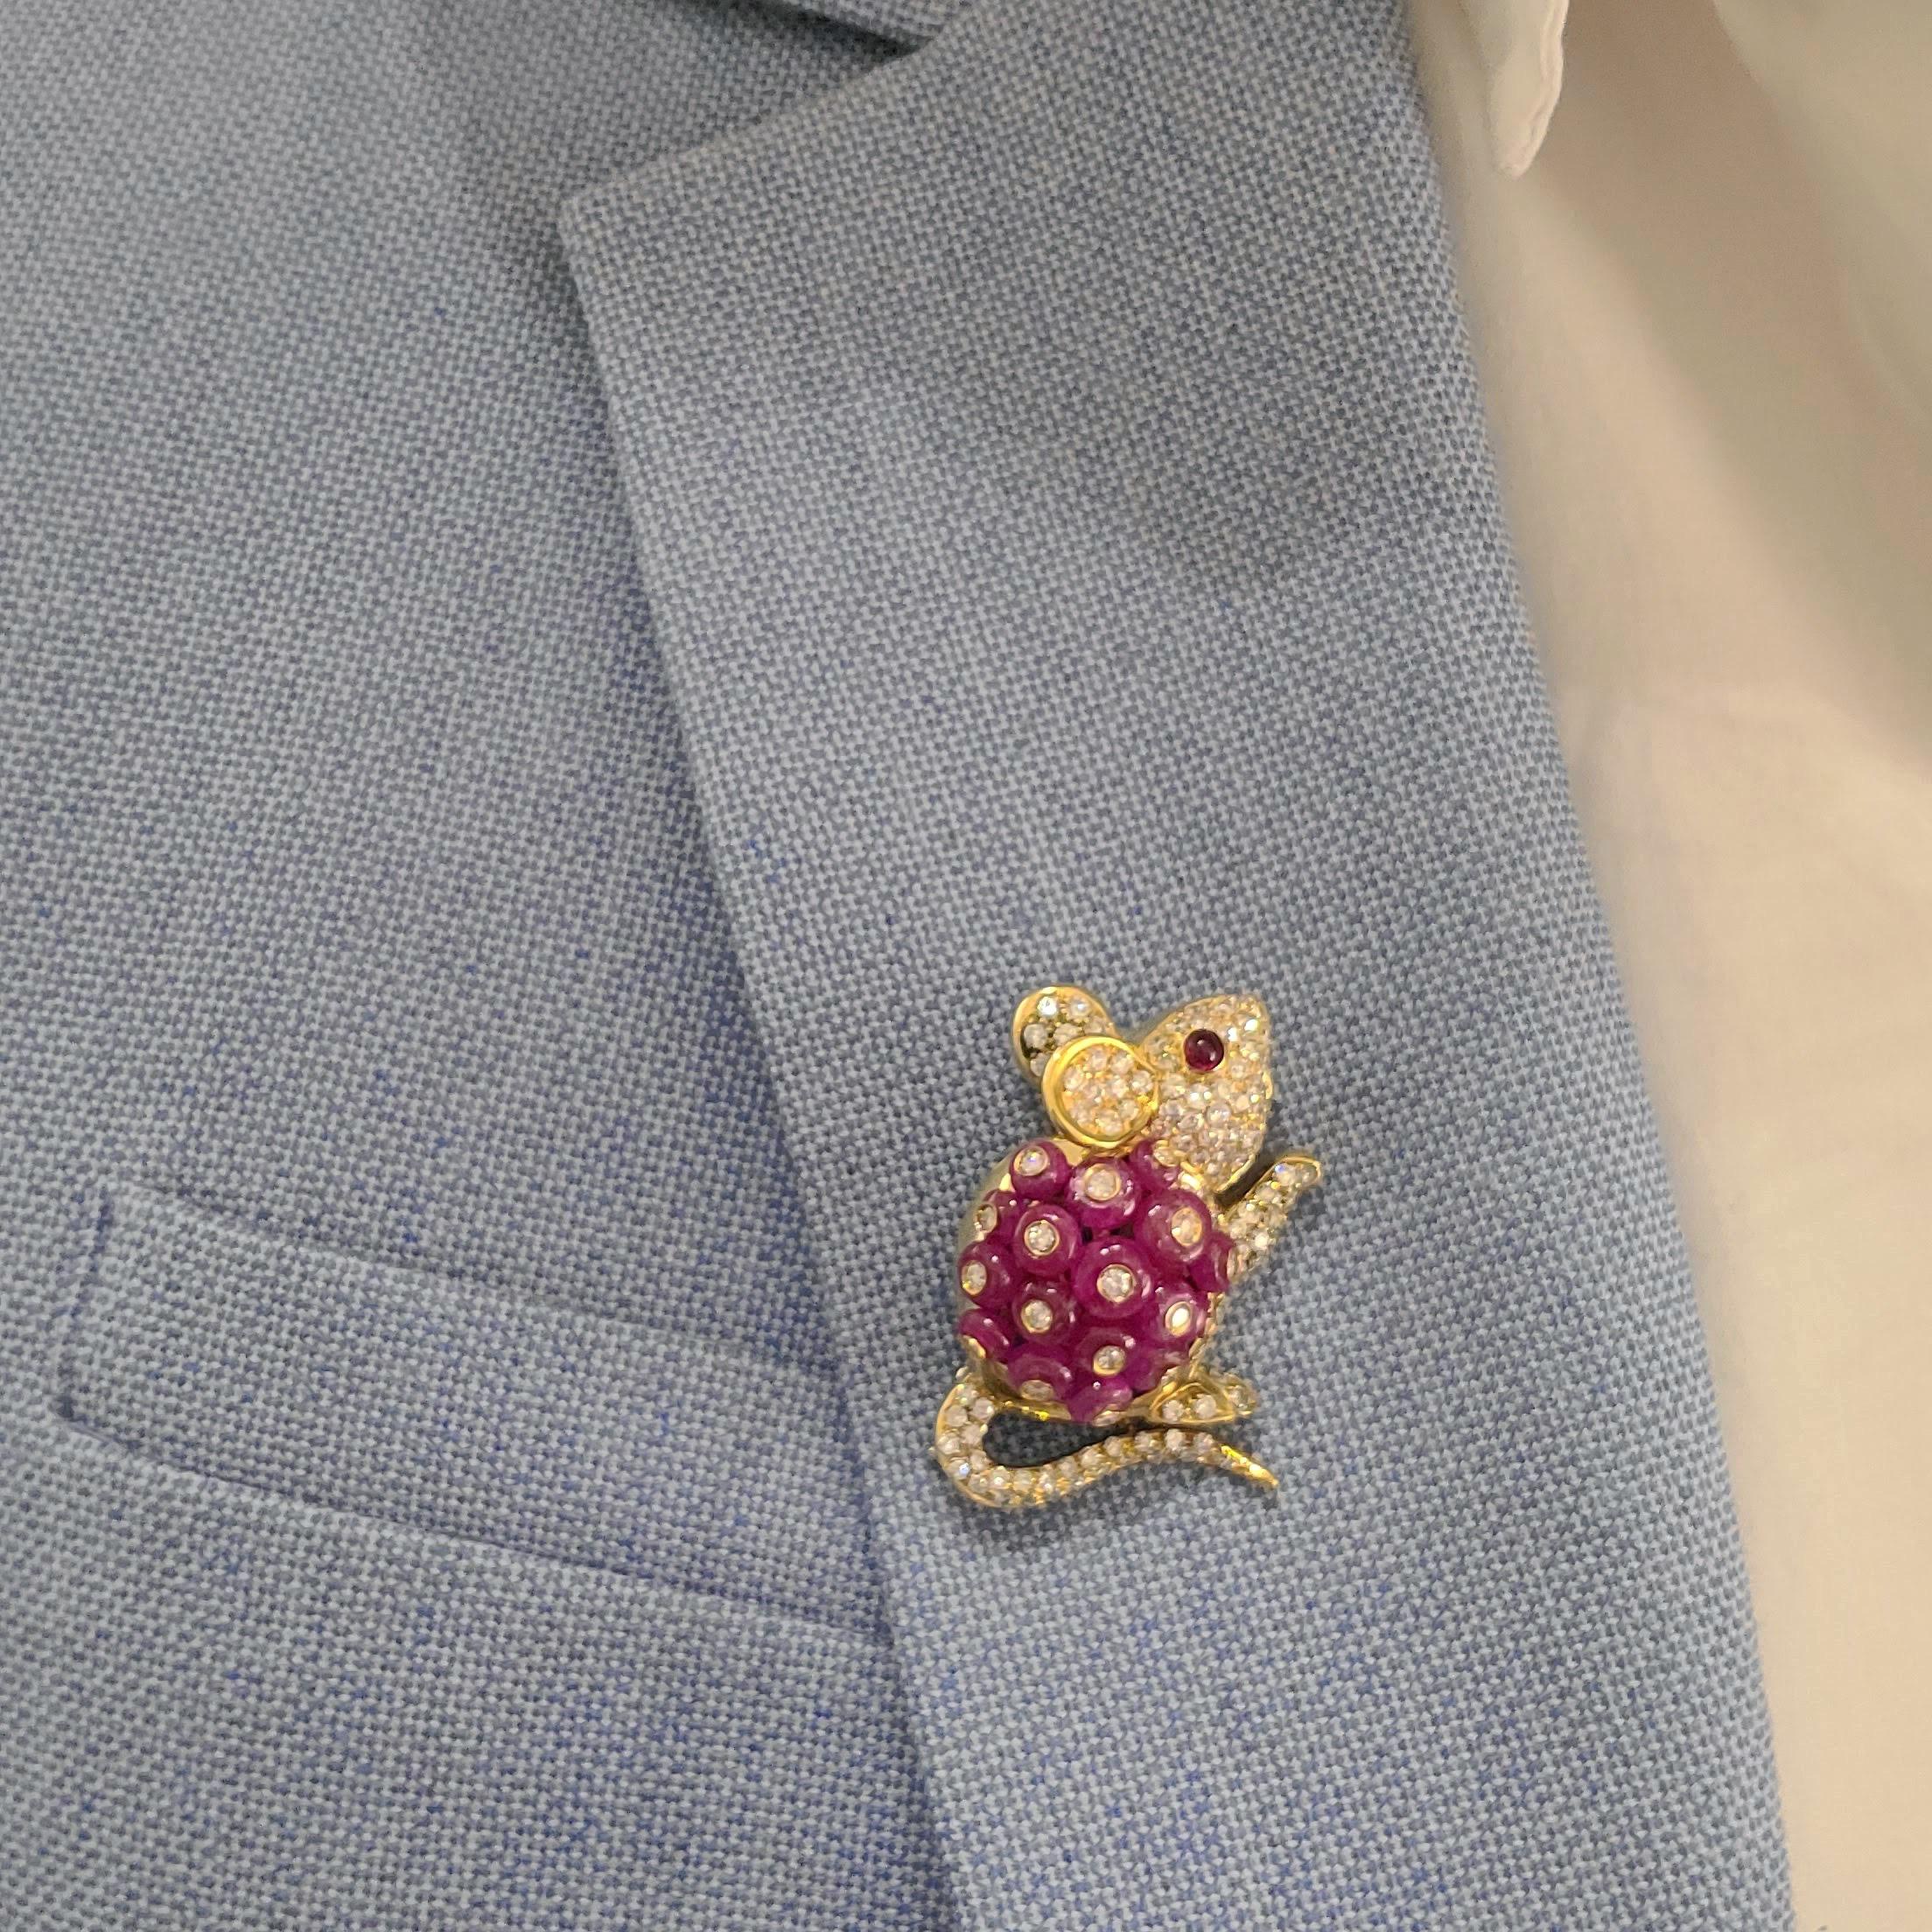 The house of Giovane has forged its name with exquisite jewelry made in one of Italy’s oldest and most esteemed workshops.
This adorable mouse brooch is the perfect example of their whimsical /classical workmanship.
The 18 karat yellow gold mouse is